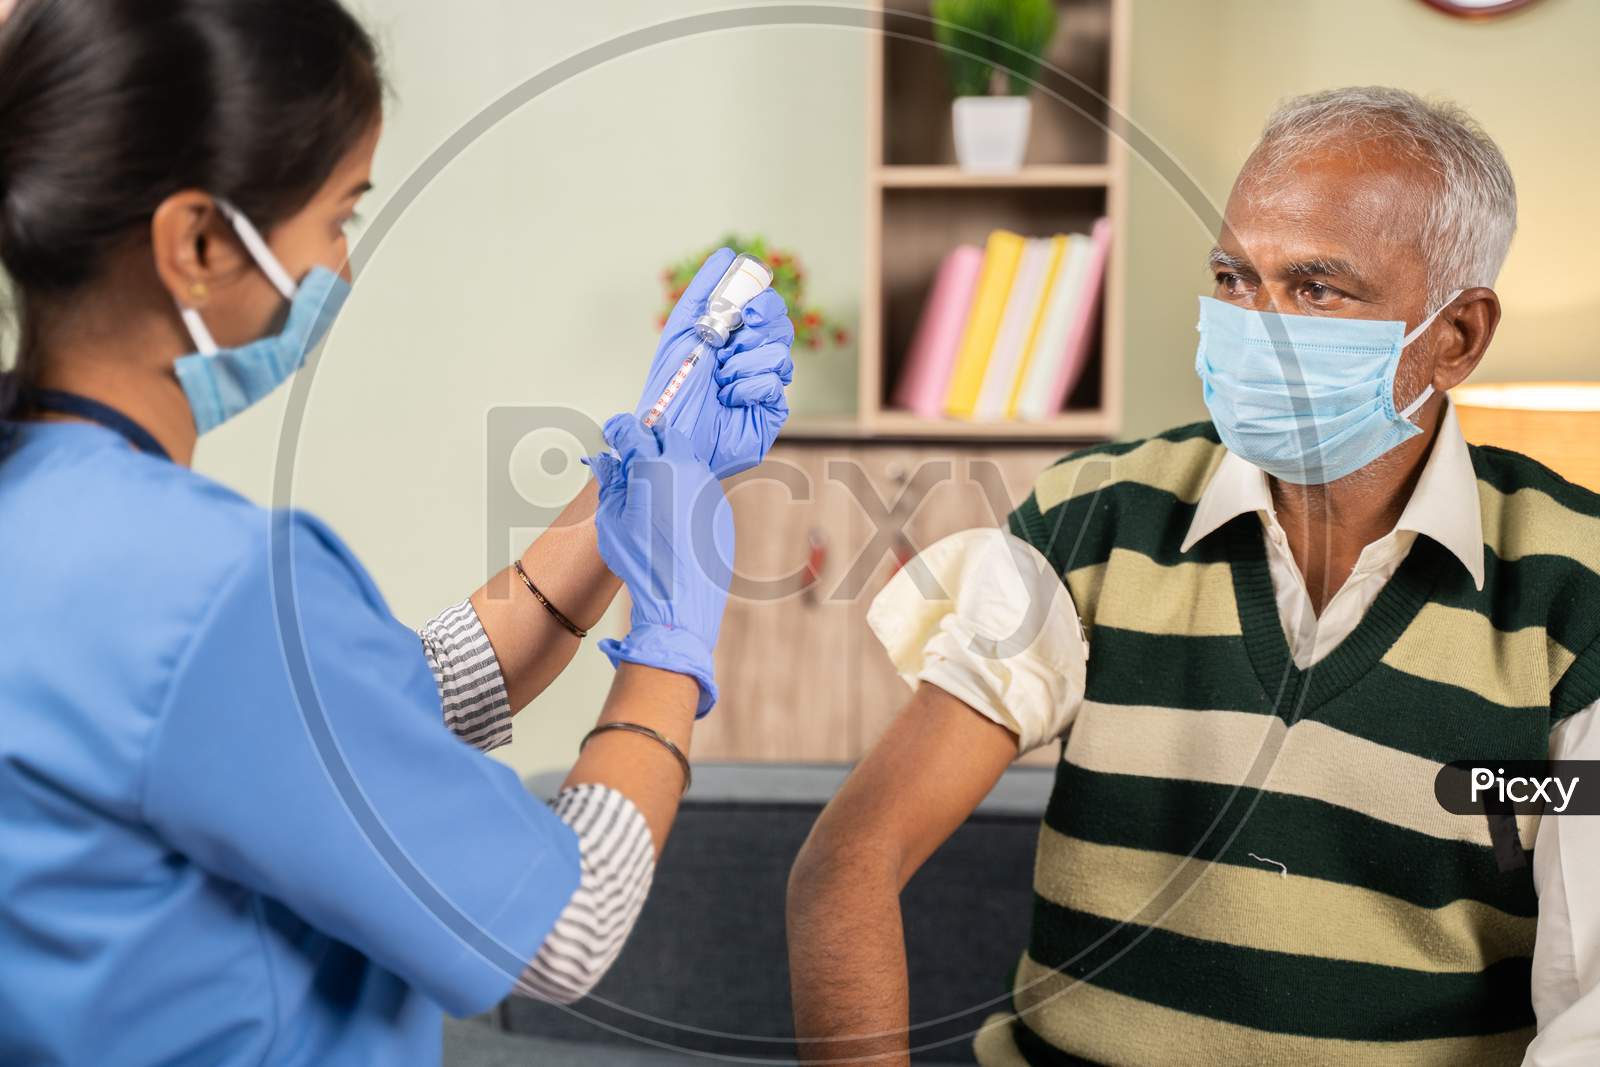 Doctor Preparing Vaccination Shot To Elderly Patient By Holding Syringe At Home - Concept Of Home Health Check To Seniors During Coronavirus Covid-19 Pandemic.